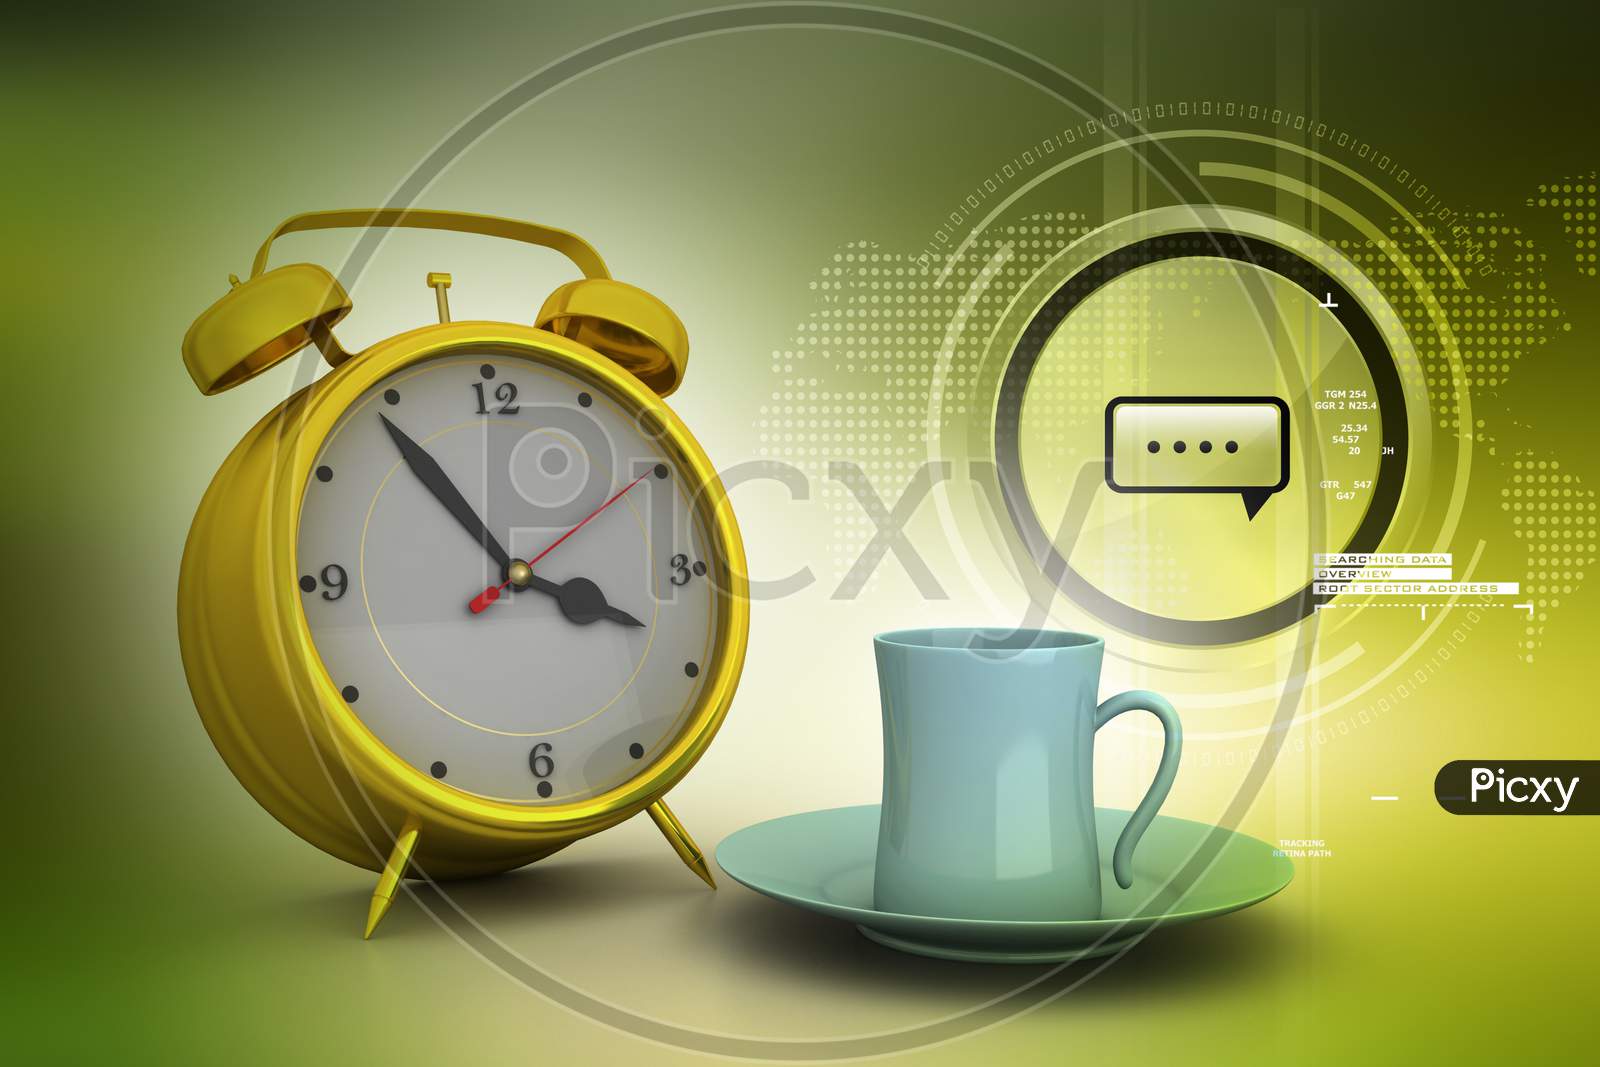 A 3D Rendered Clock with cup and saucer